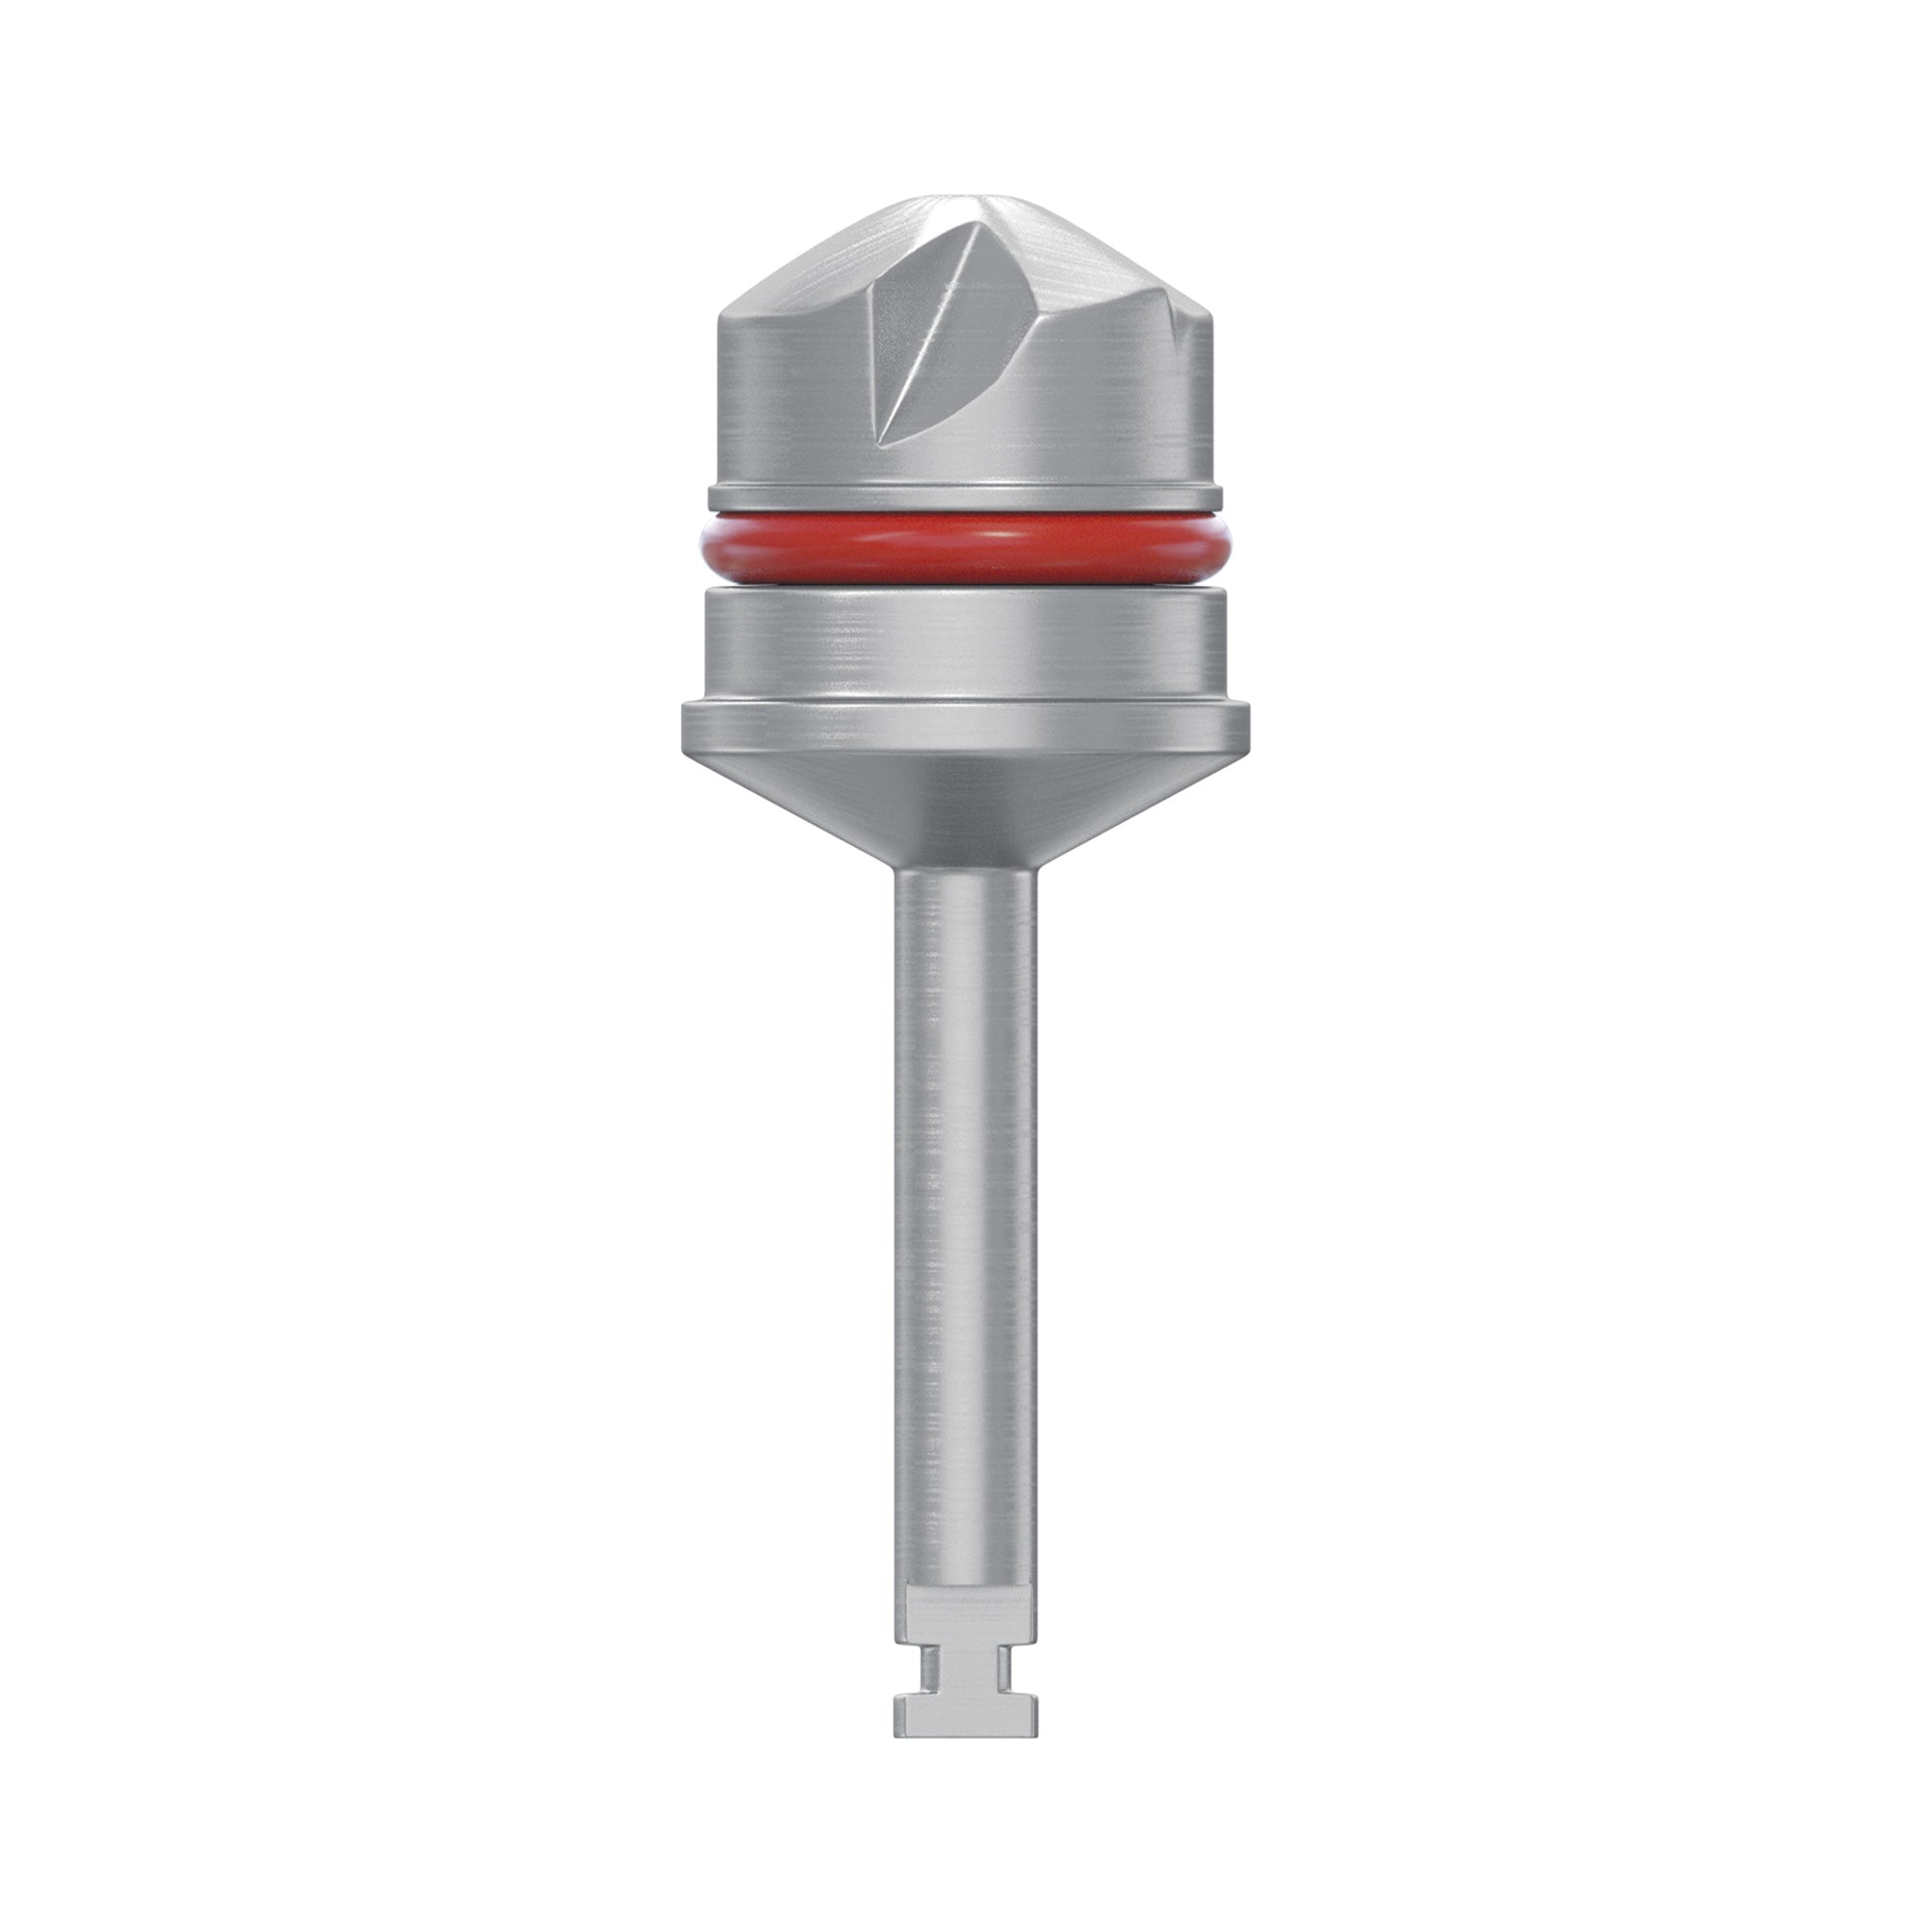 DSI Reamer For Lateral Sinus Lifting Approach "LASR Drill"